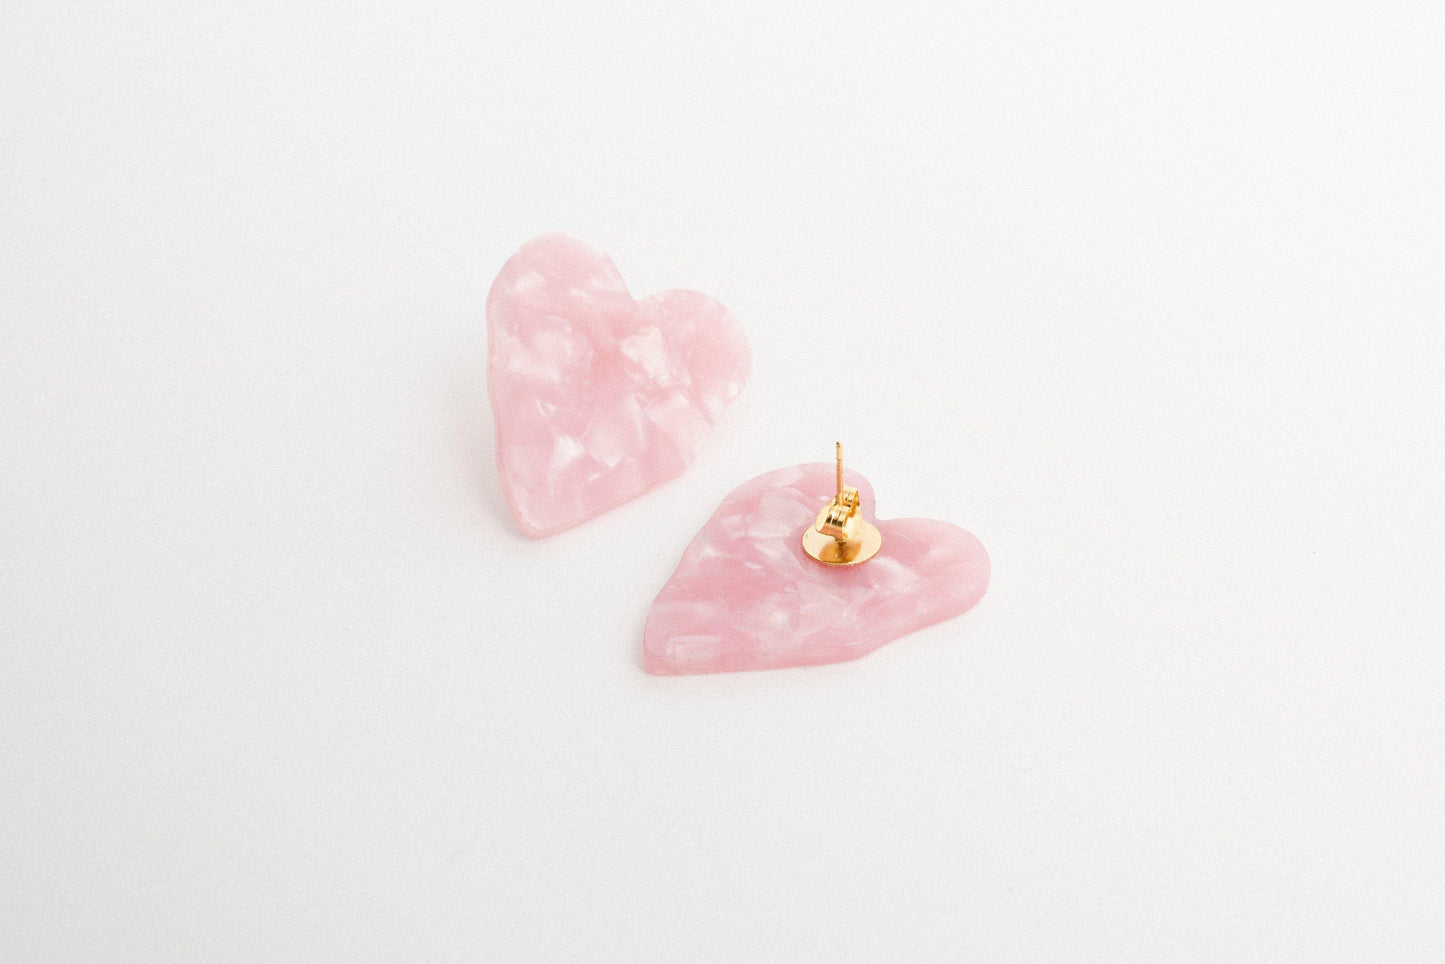 Strawberry Cream Heart Earrings - Closed Caption | Shop Vintage + Handmade. Always Sustainable. Never Wasteful.